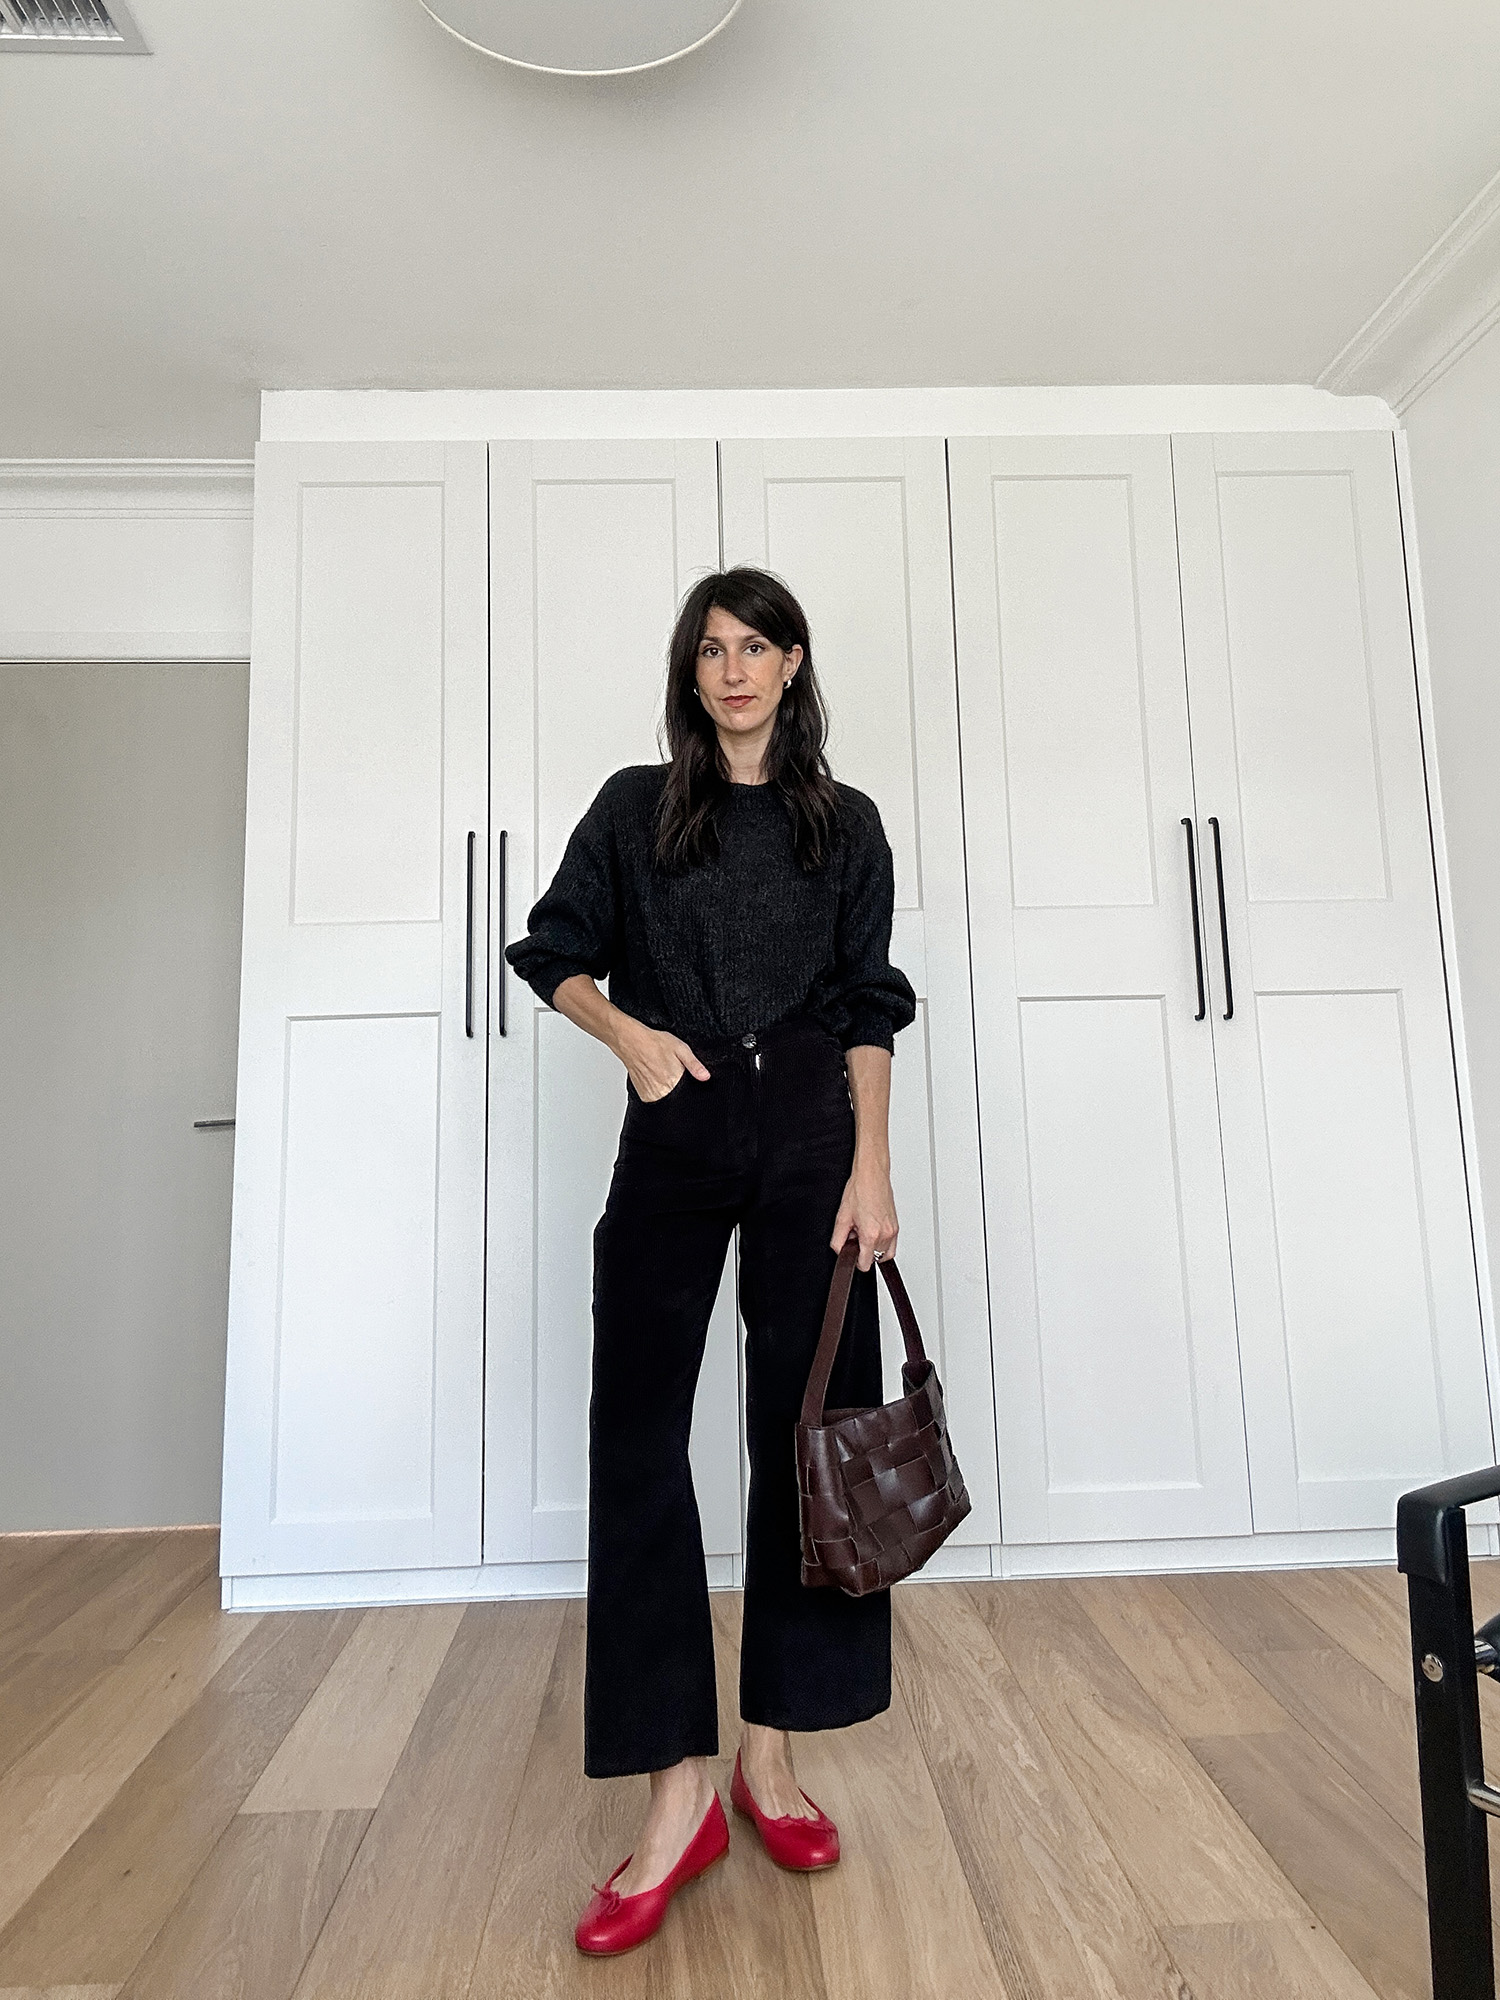 Wearing all black outfit worn with red ballet flats minimalist style